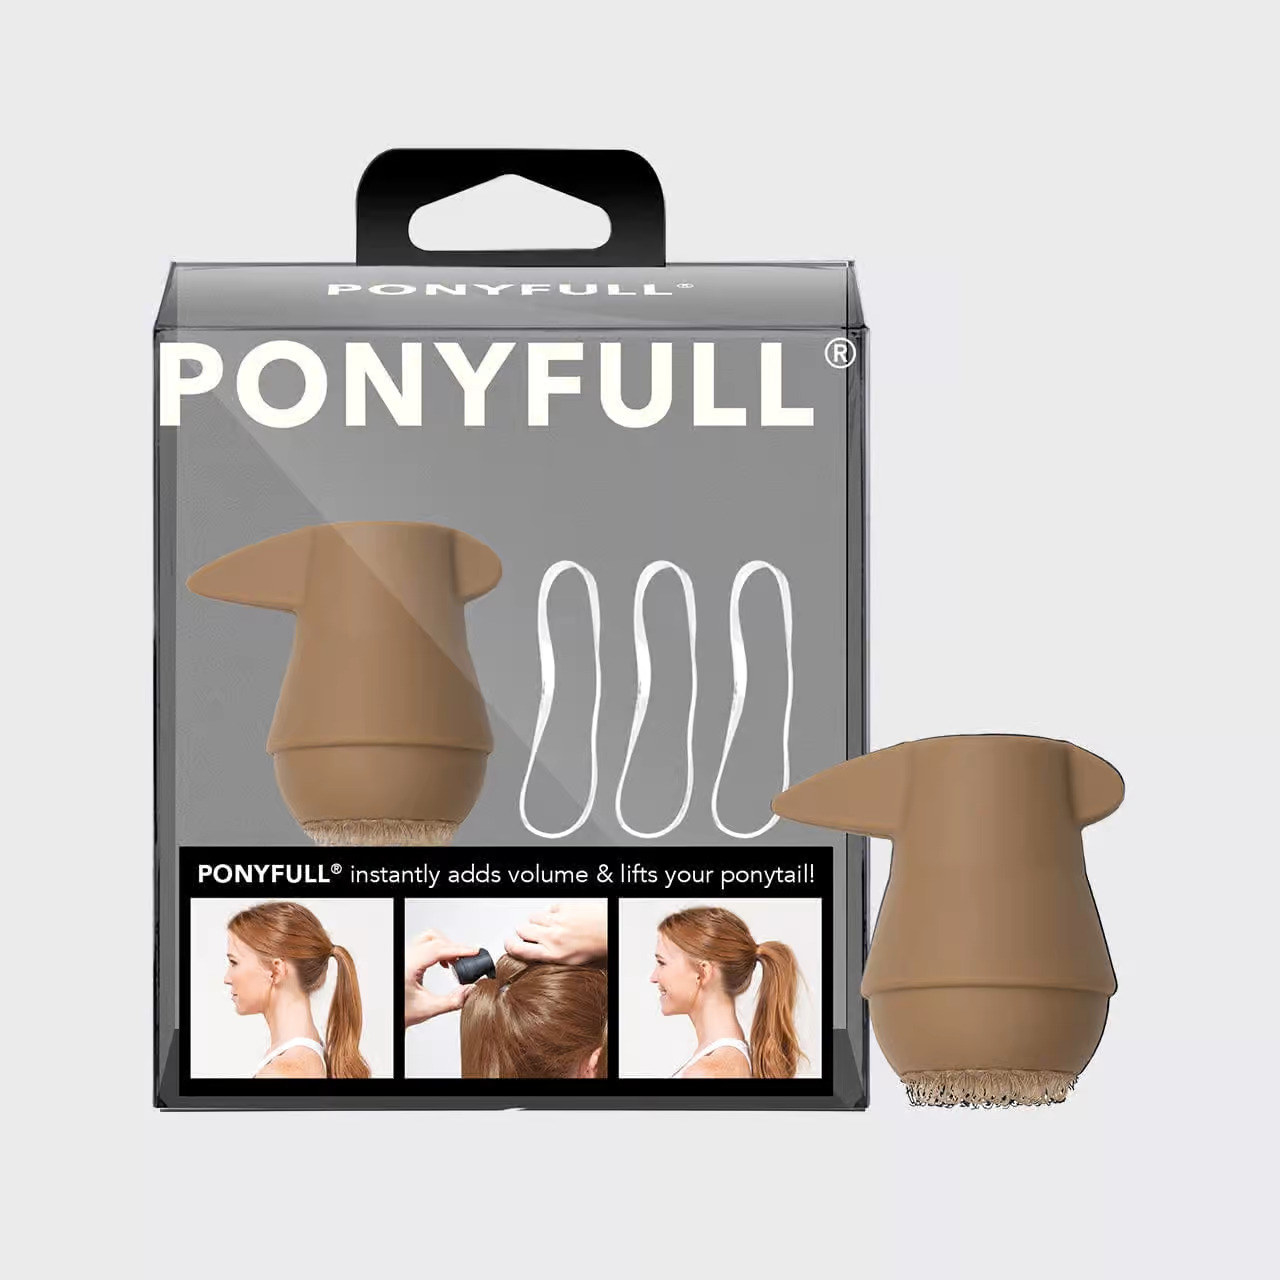 Ponytail lifter product beside the packaging